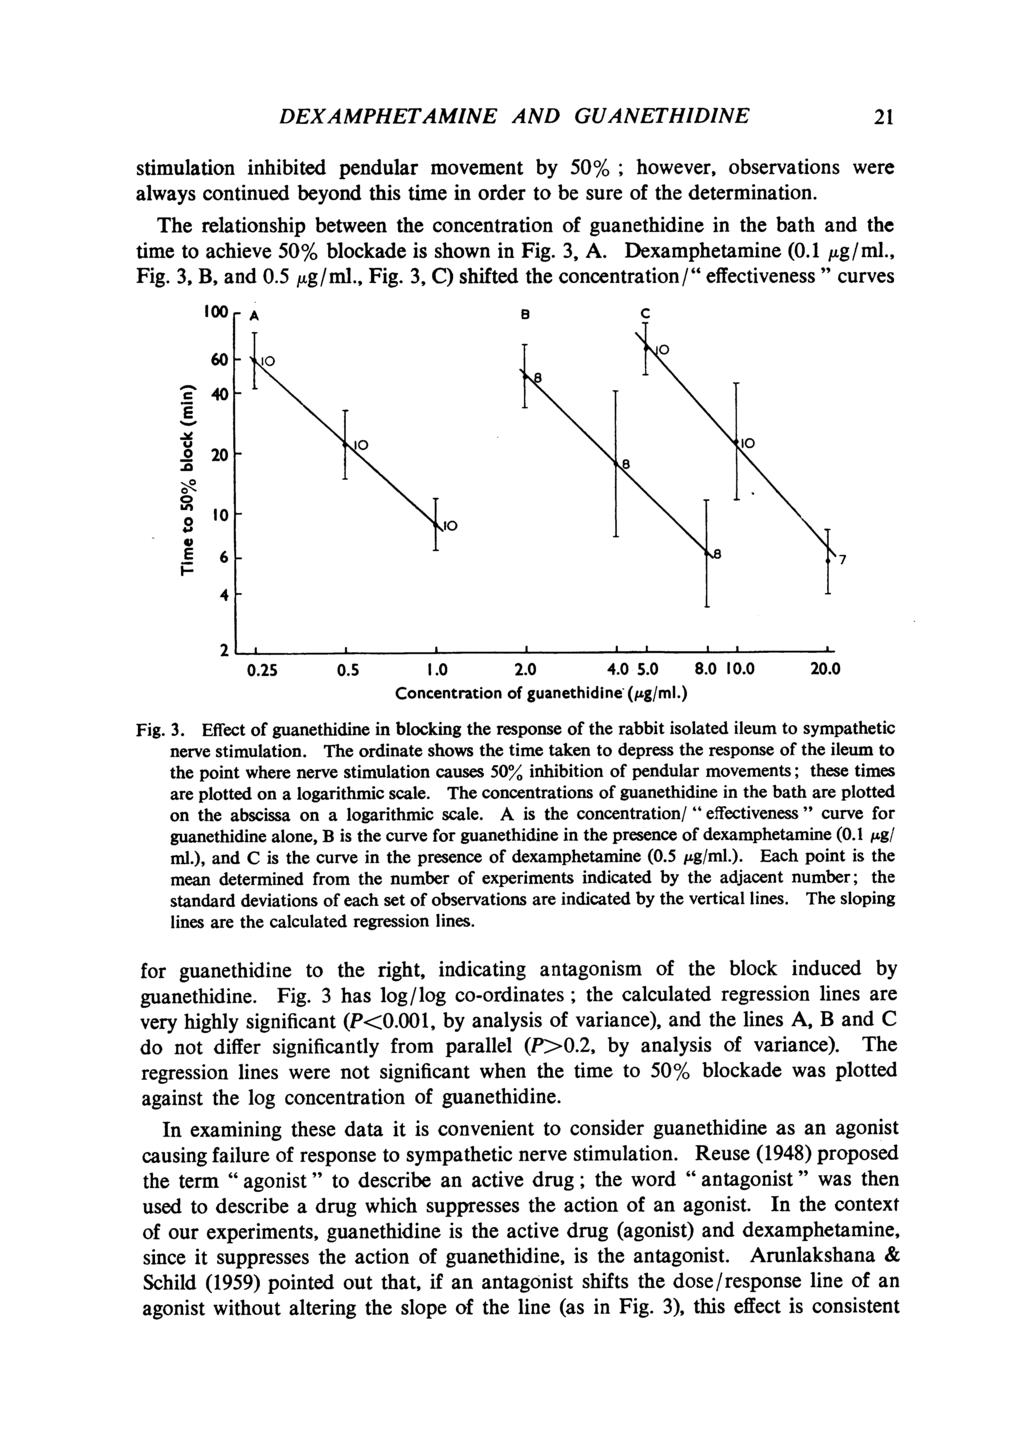 DEXAMPHETAMINE AND GUANETHIDINE stimulation inhibited pendular movement by 5%; however, observations were always continued beyond this time in order to be sure of the determination.